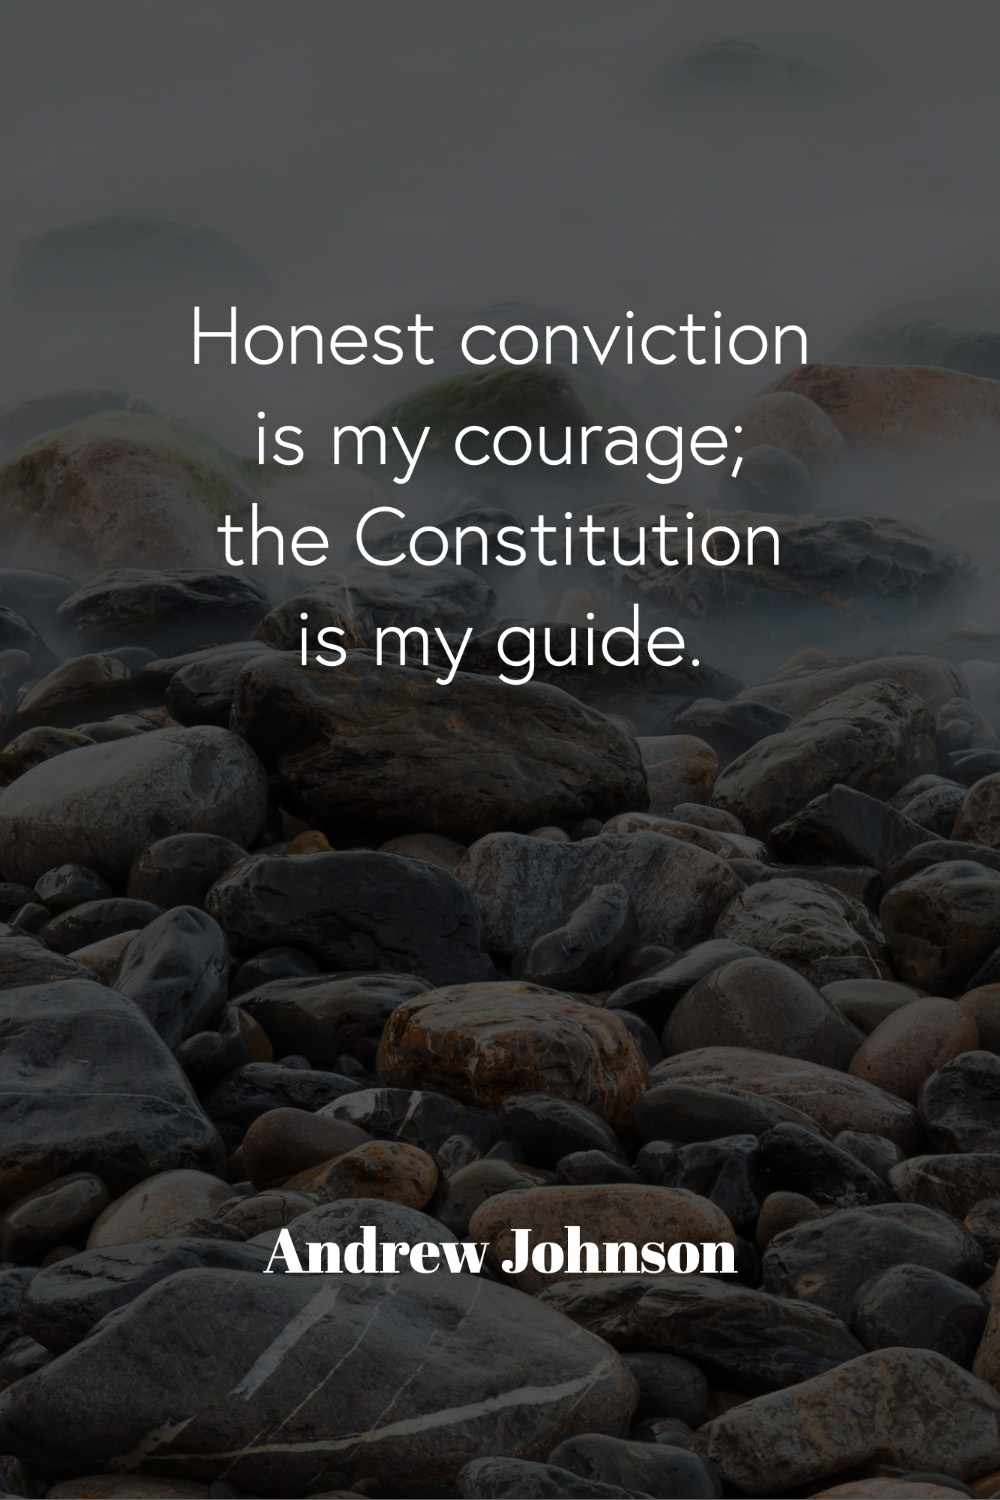 Quote by Andrew Johnson